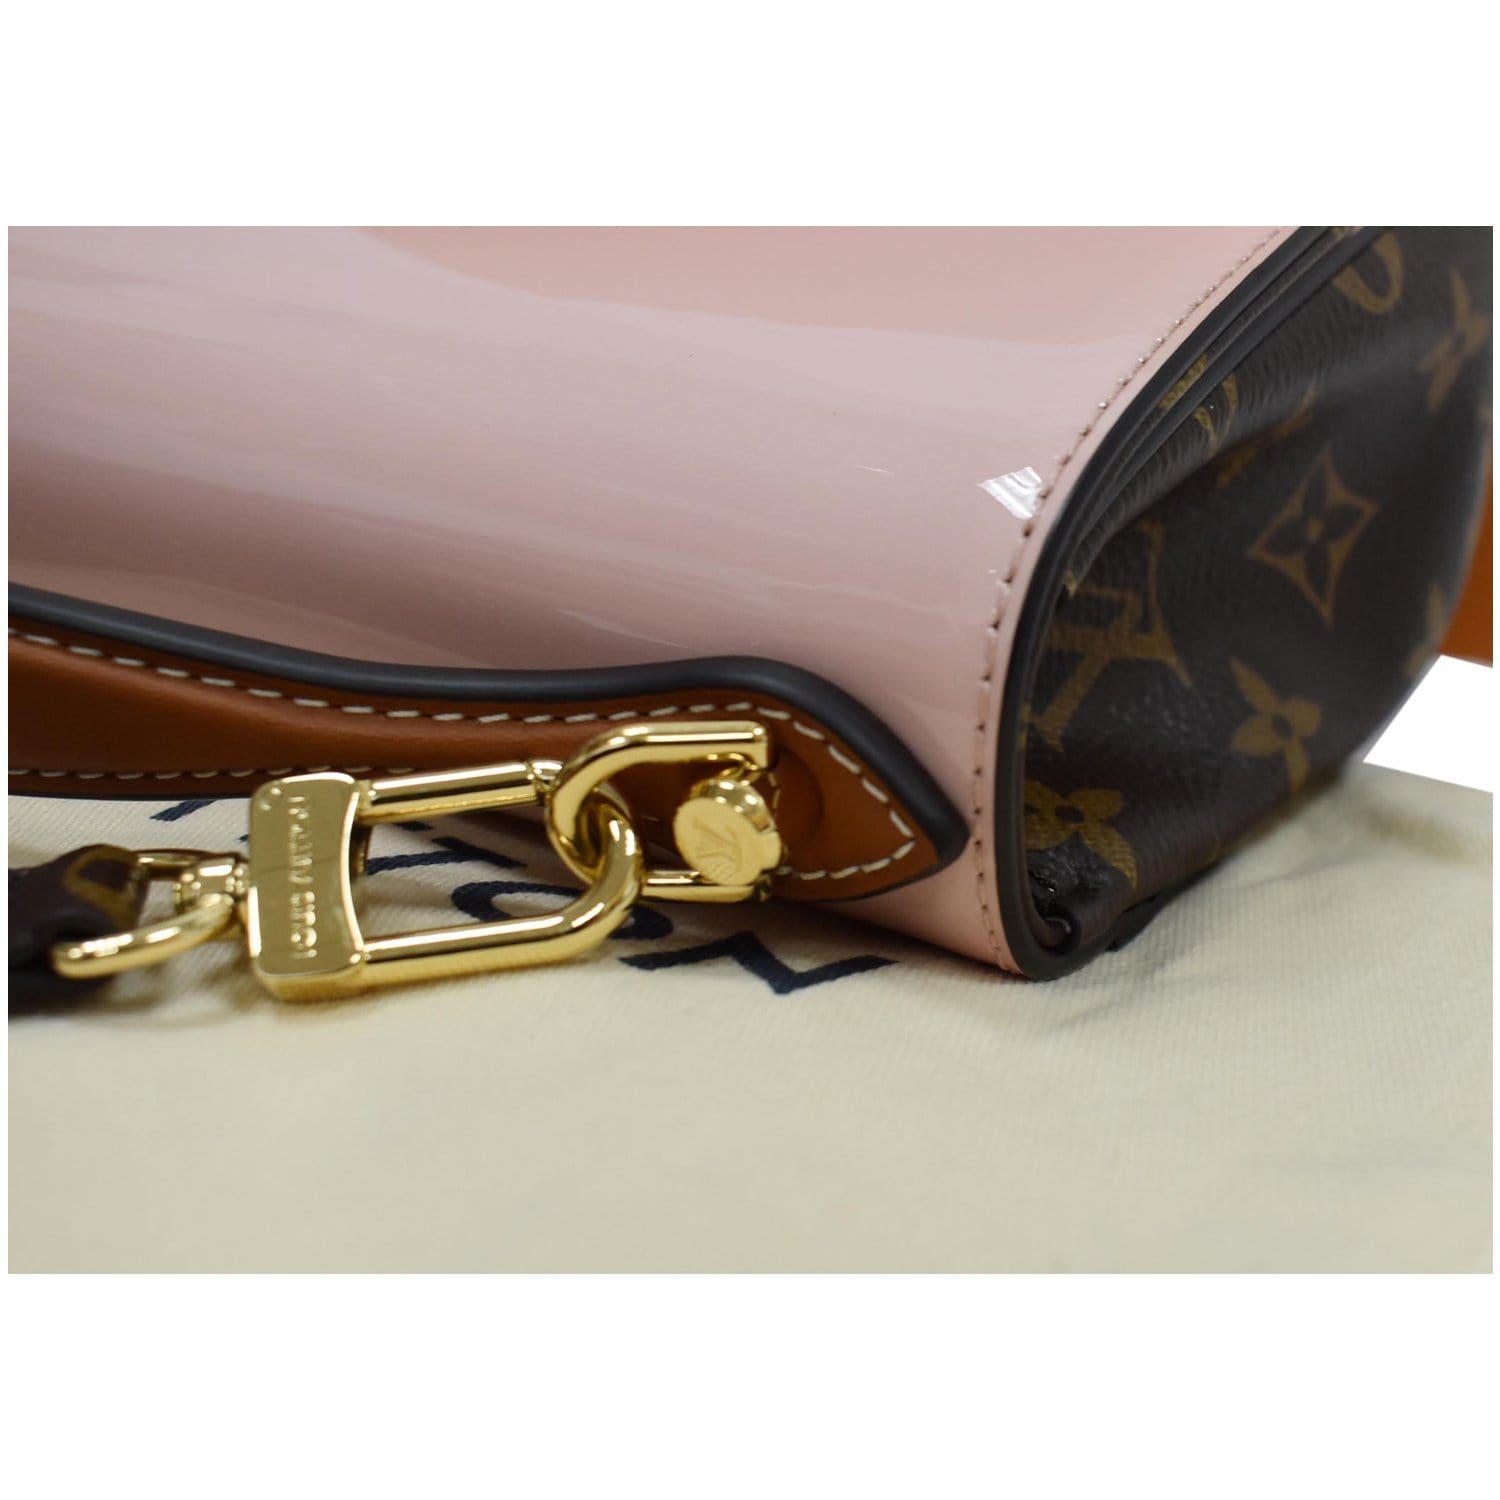 Favorite patent leather crossbody bag Louis Vuitton Brown in